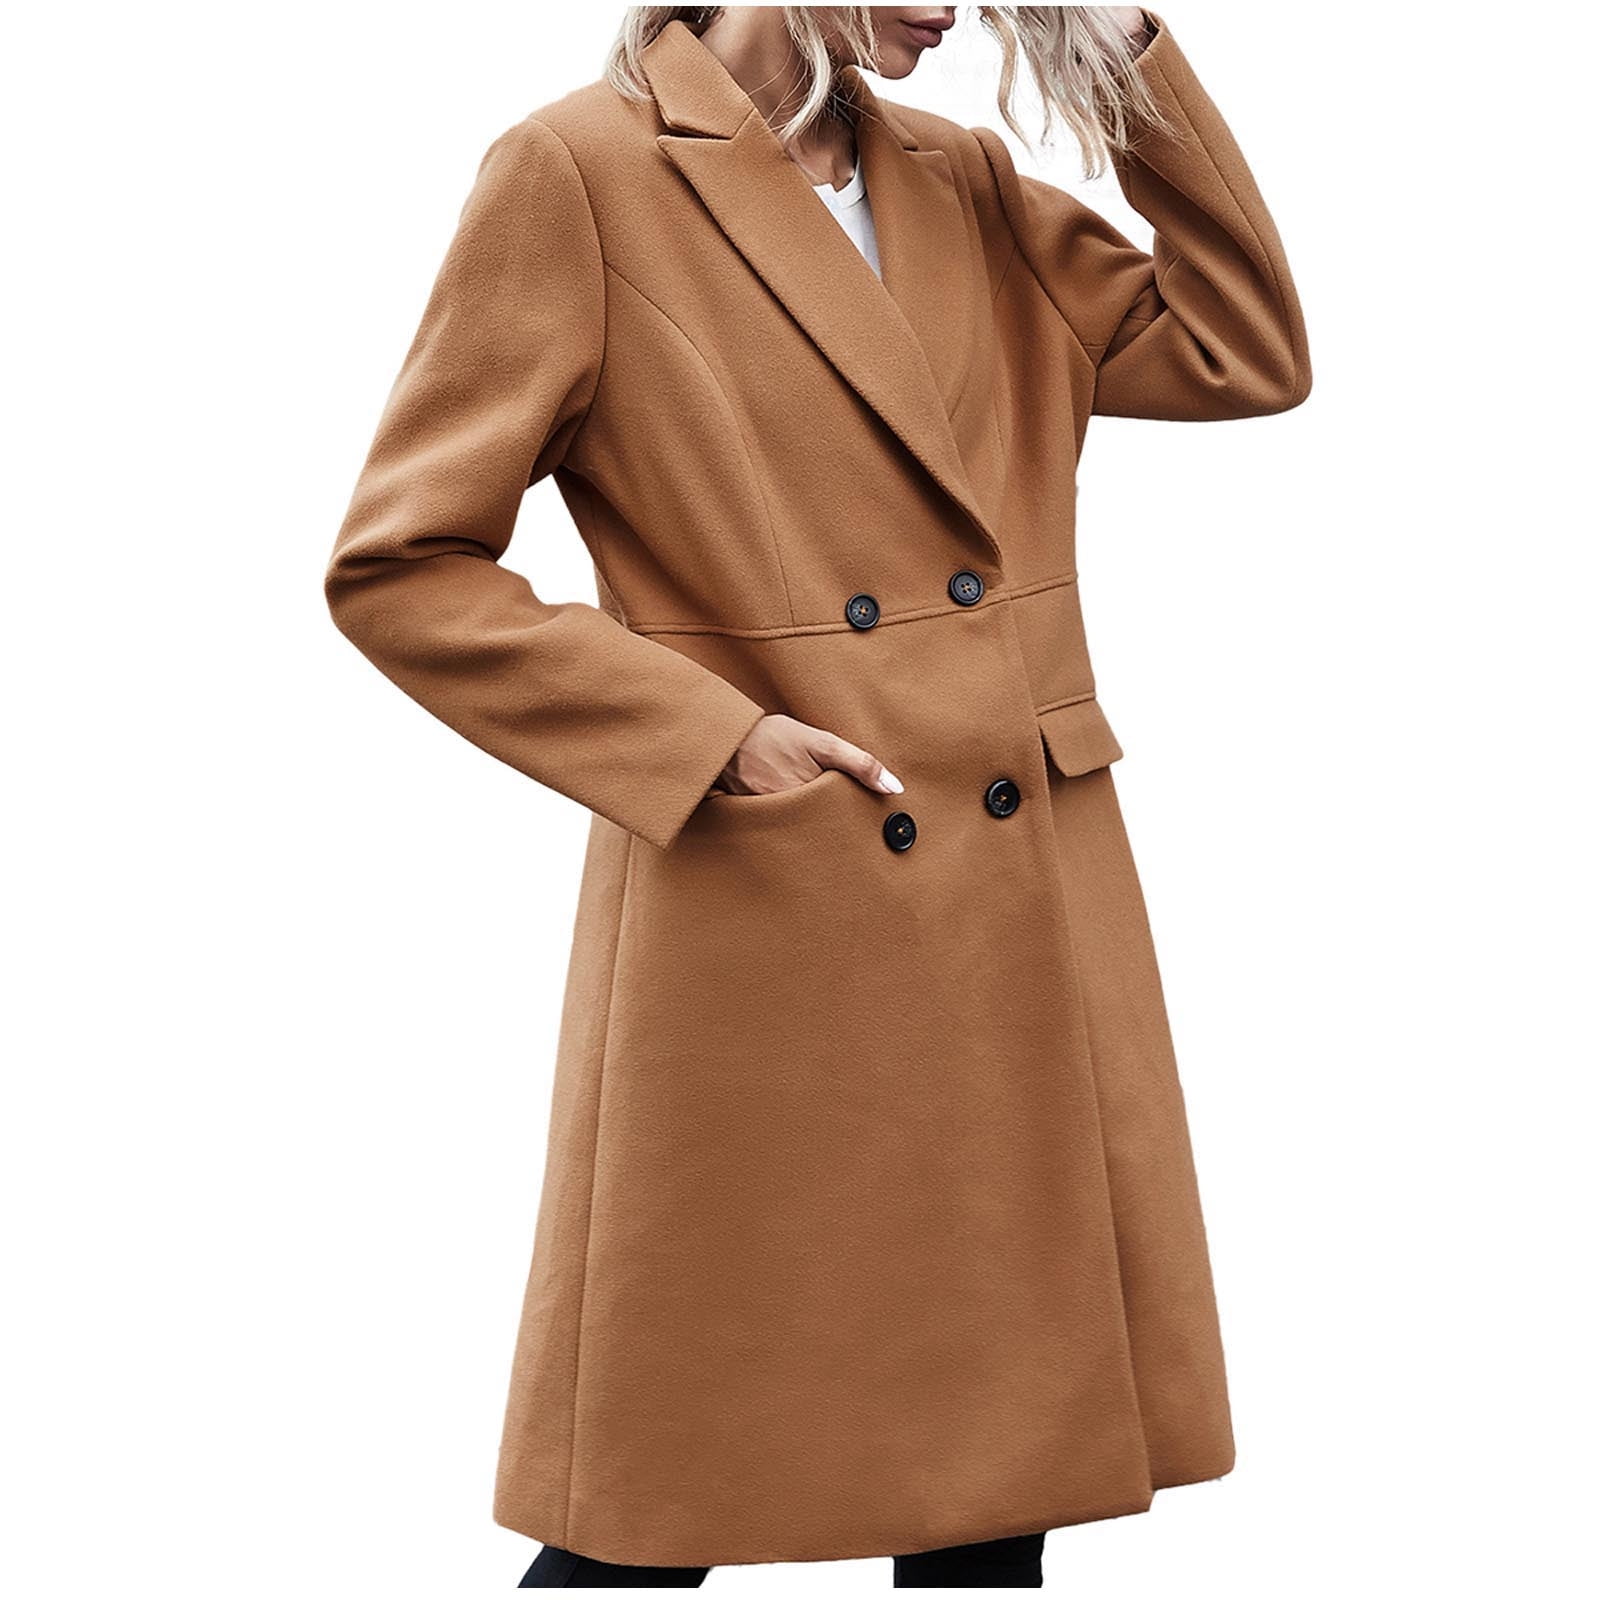 Womens Casual Khaki Trench Coat Lapel Open Front Outerwear Mid